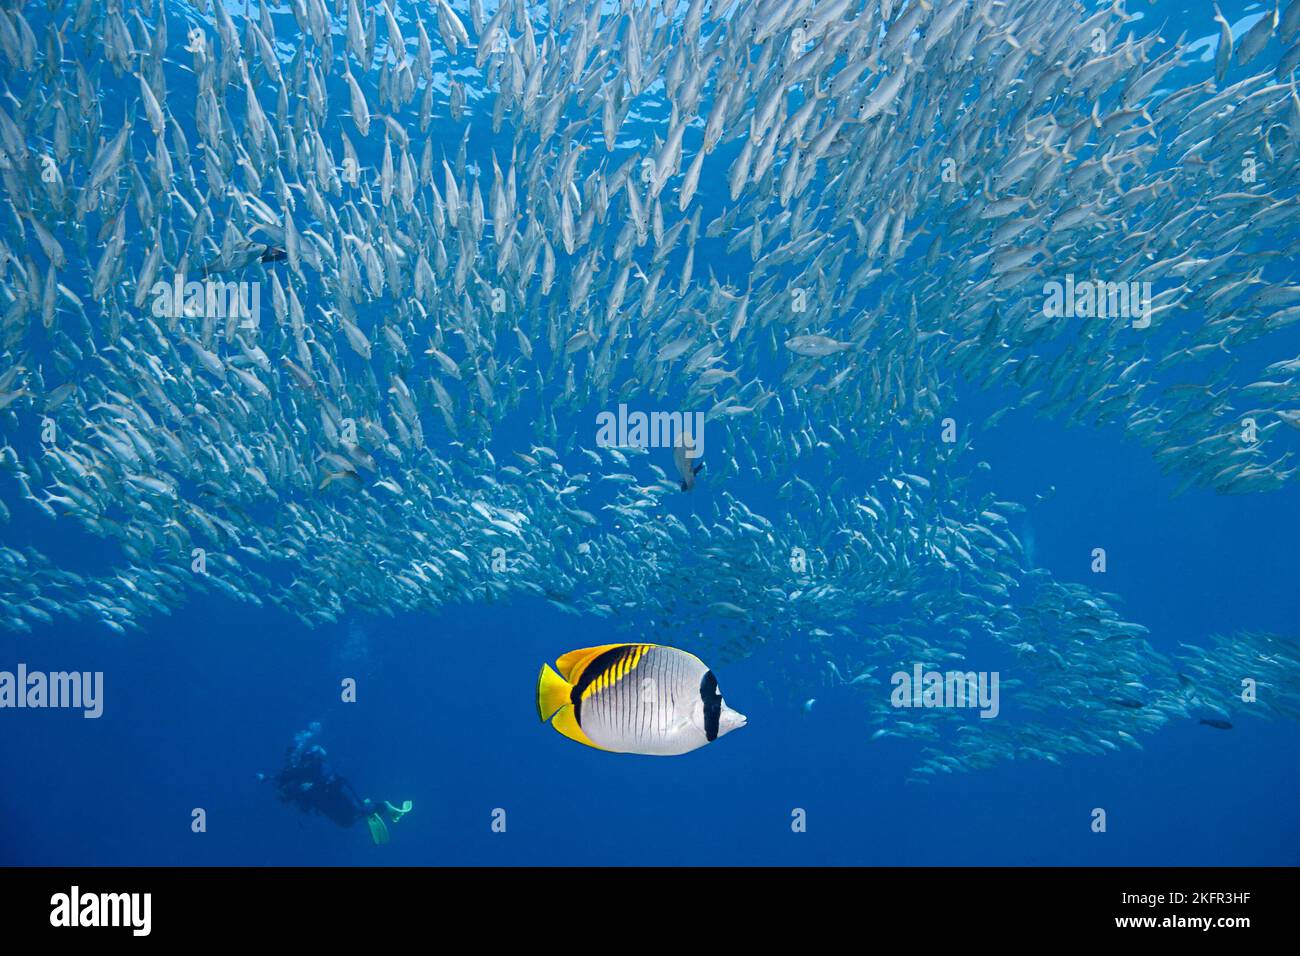 a lined butterflyfish, Chaetodon lineolatus, swims under a school of square-spot goatfish, yellow-striped goatfish, or yellow-lined goatfish, Hawaii Stock Photo